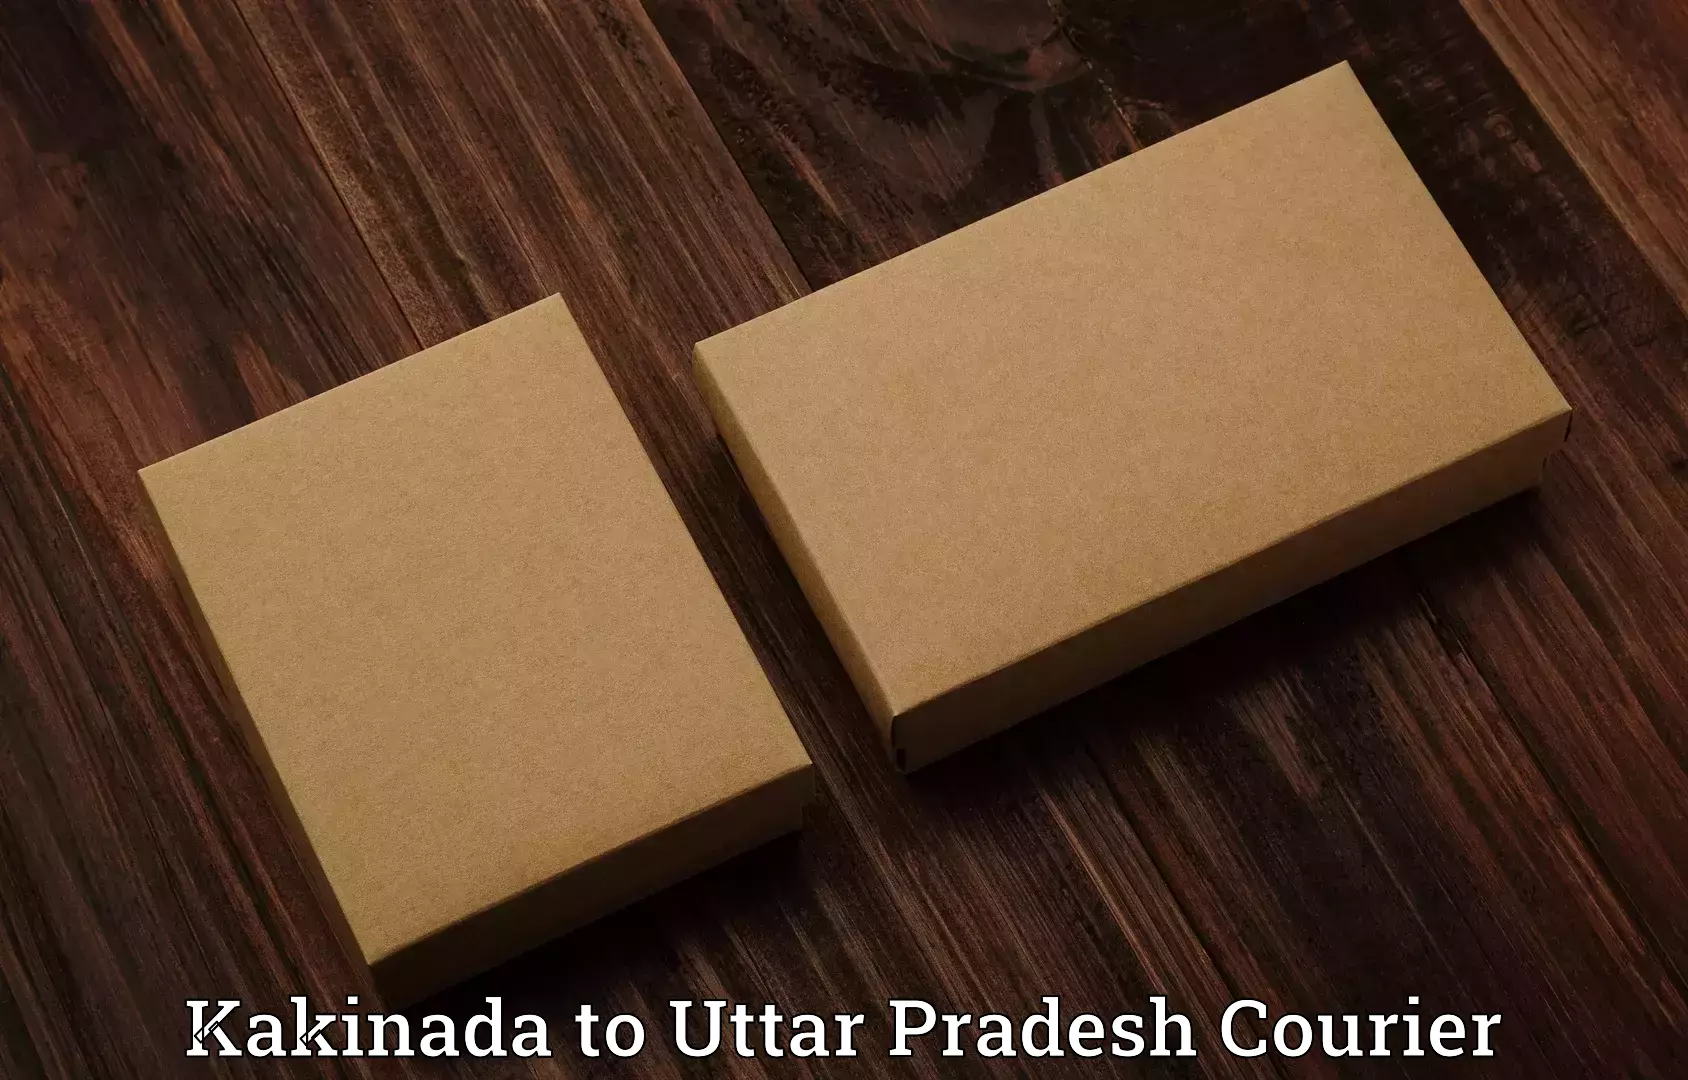 Personal effects shipping in Kakinada to Dhaurahara